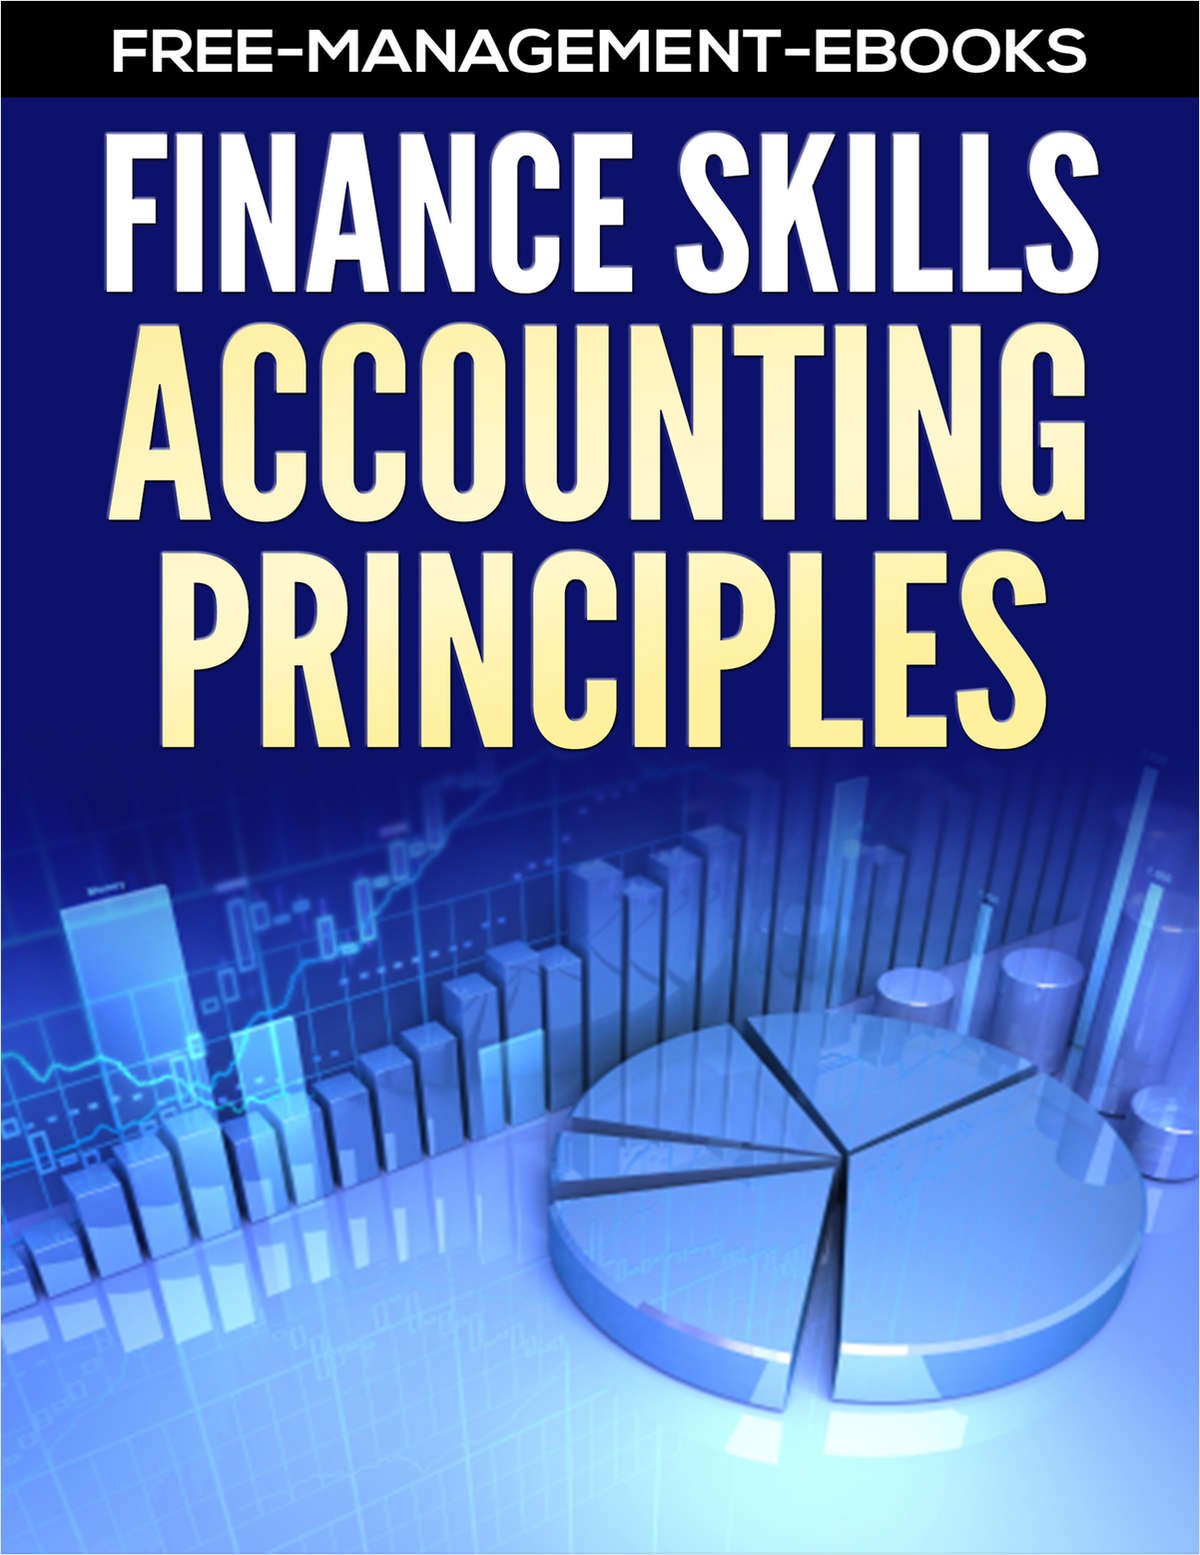 Accounting Principles - Developing Your Finance Skills